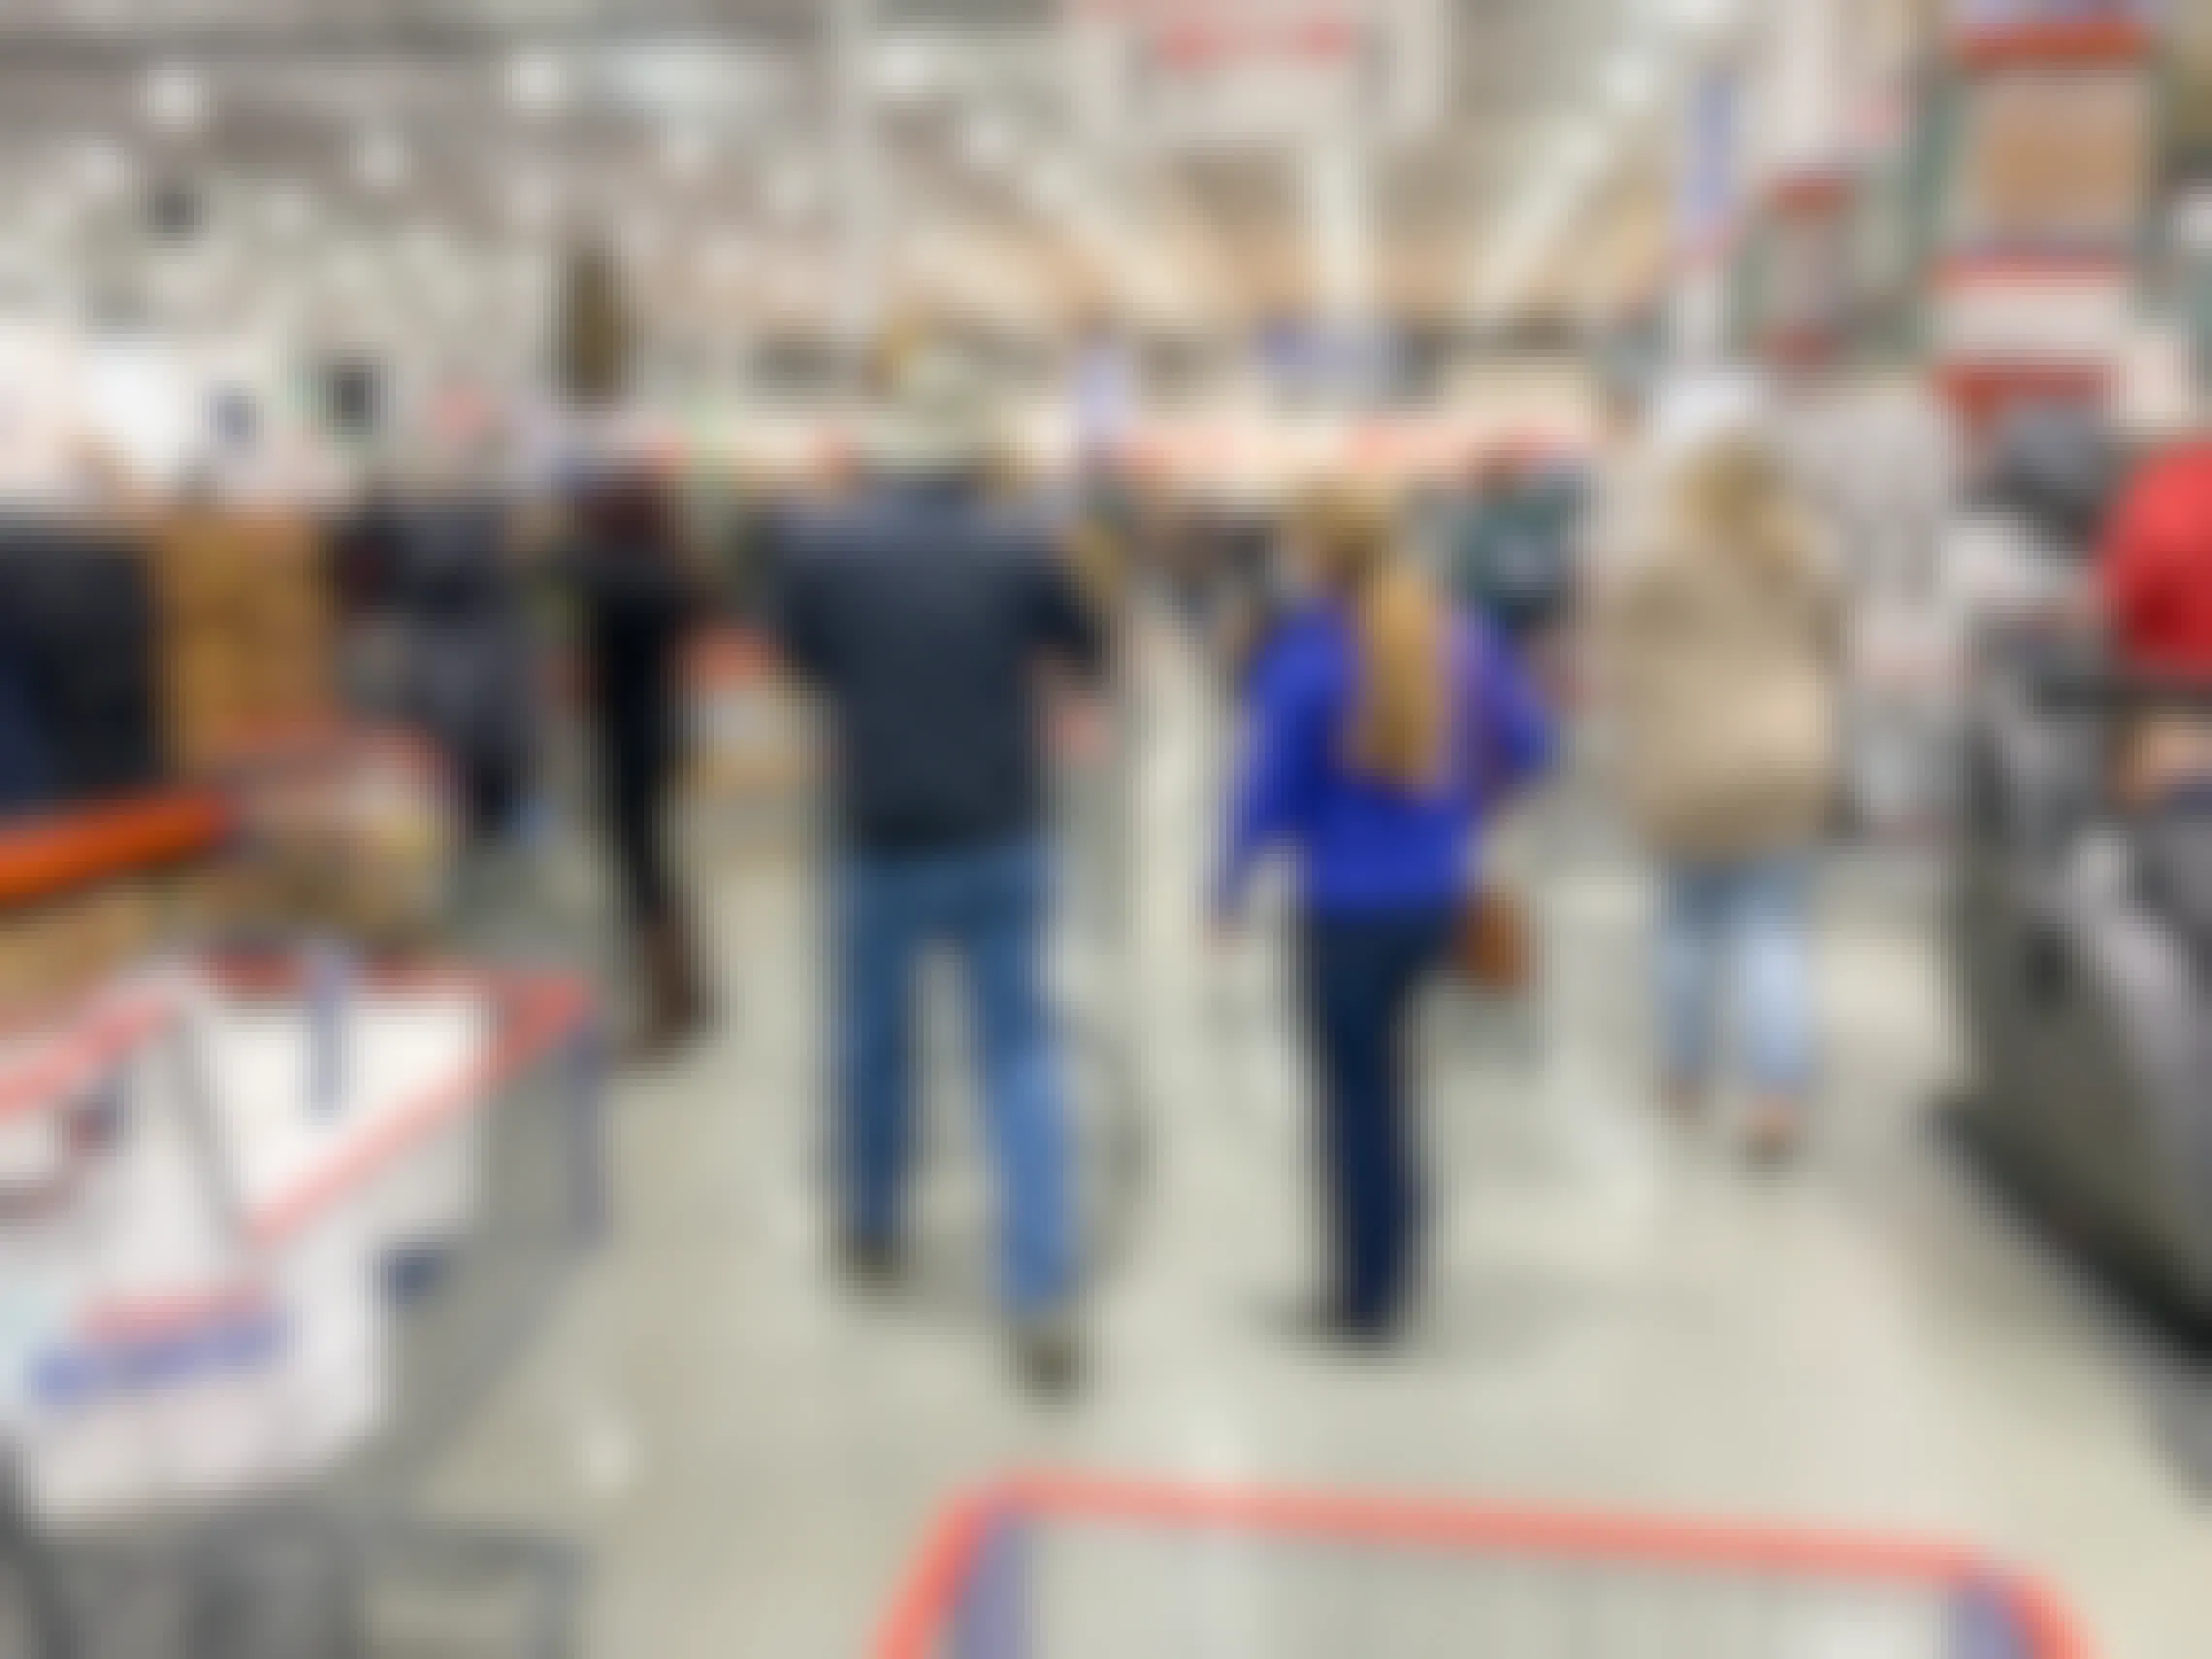 A crowd of people shopping inside Costco